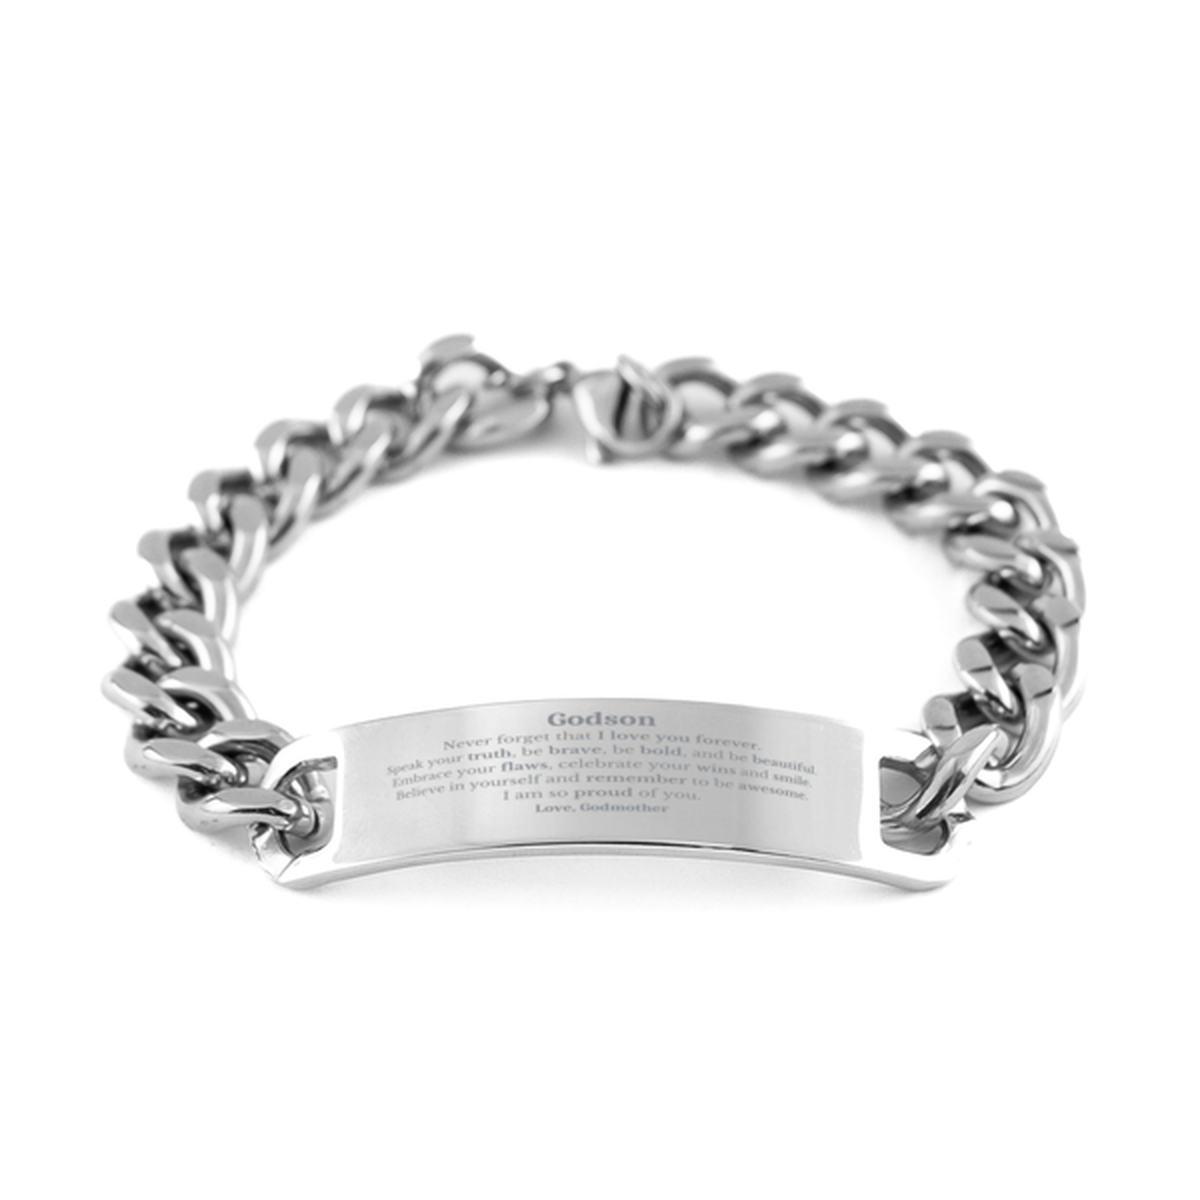 Godson Cuban Chain Stainless Steel Bracelet, Never forget that I love you forever, Inspirational Godson Birthday Unique Gifts From Godmother